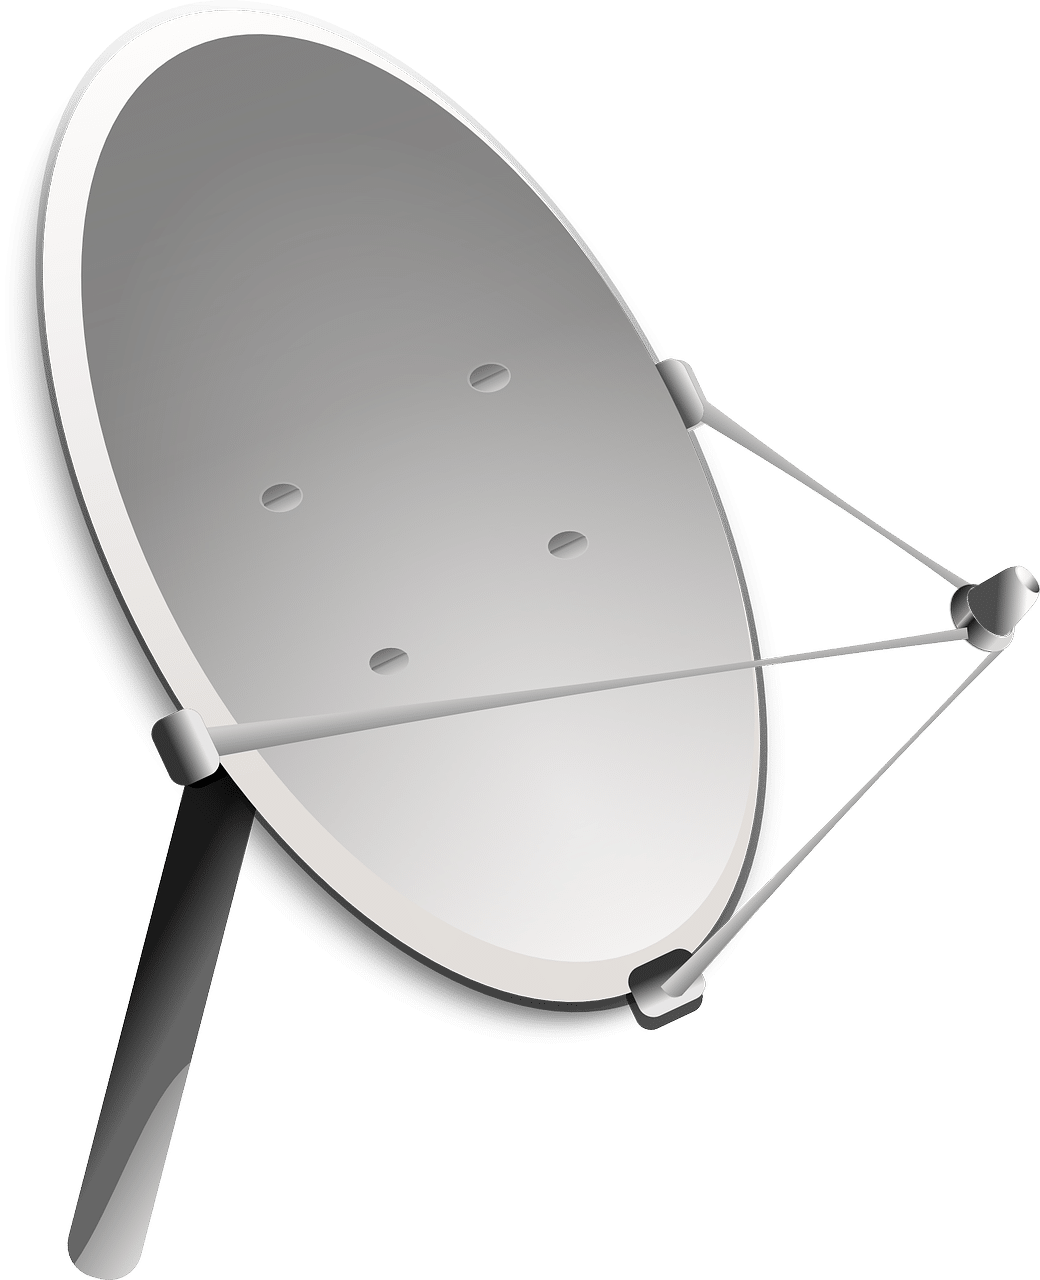 How to align a satelite dish